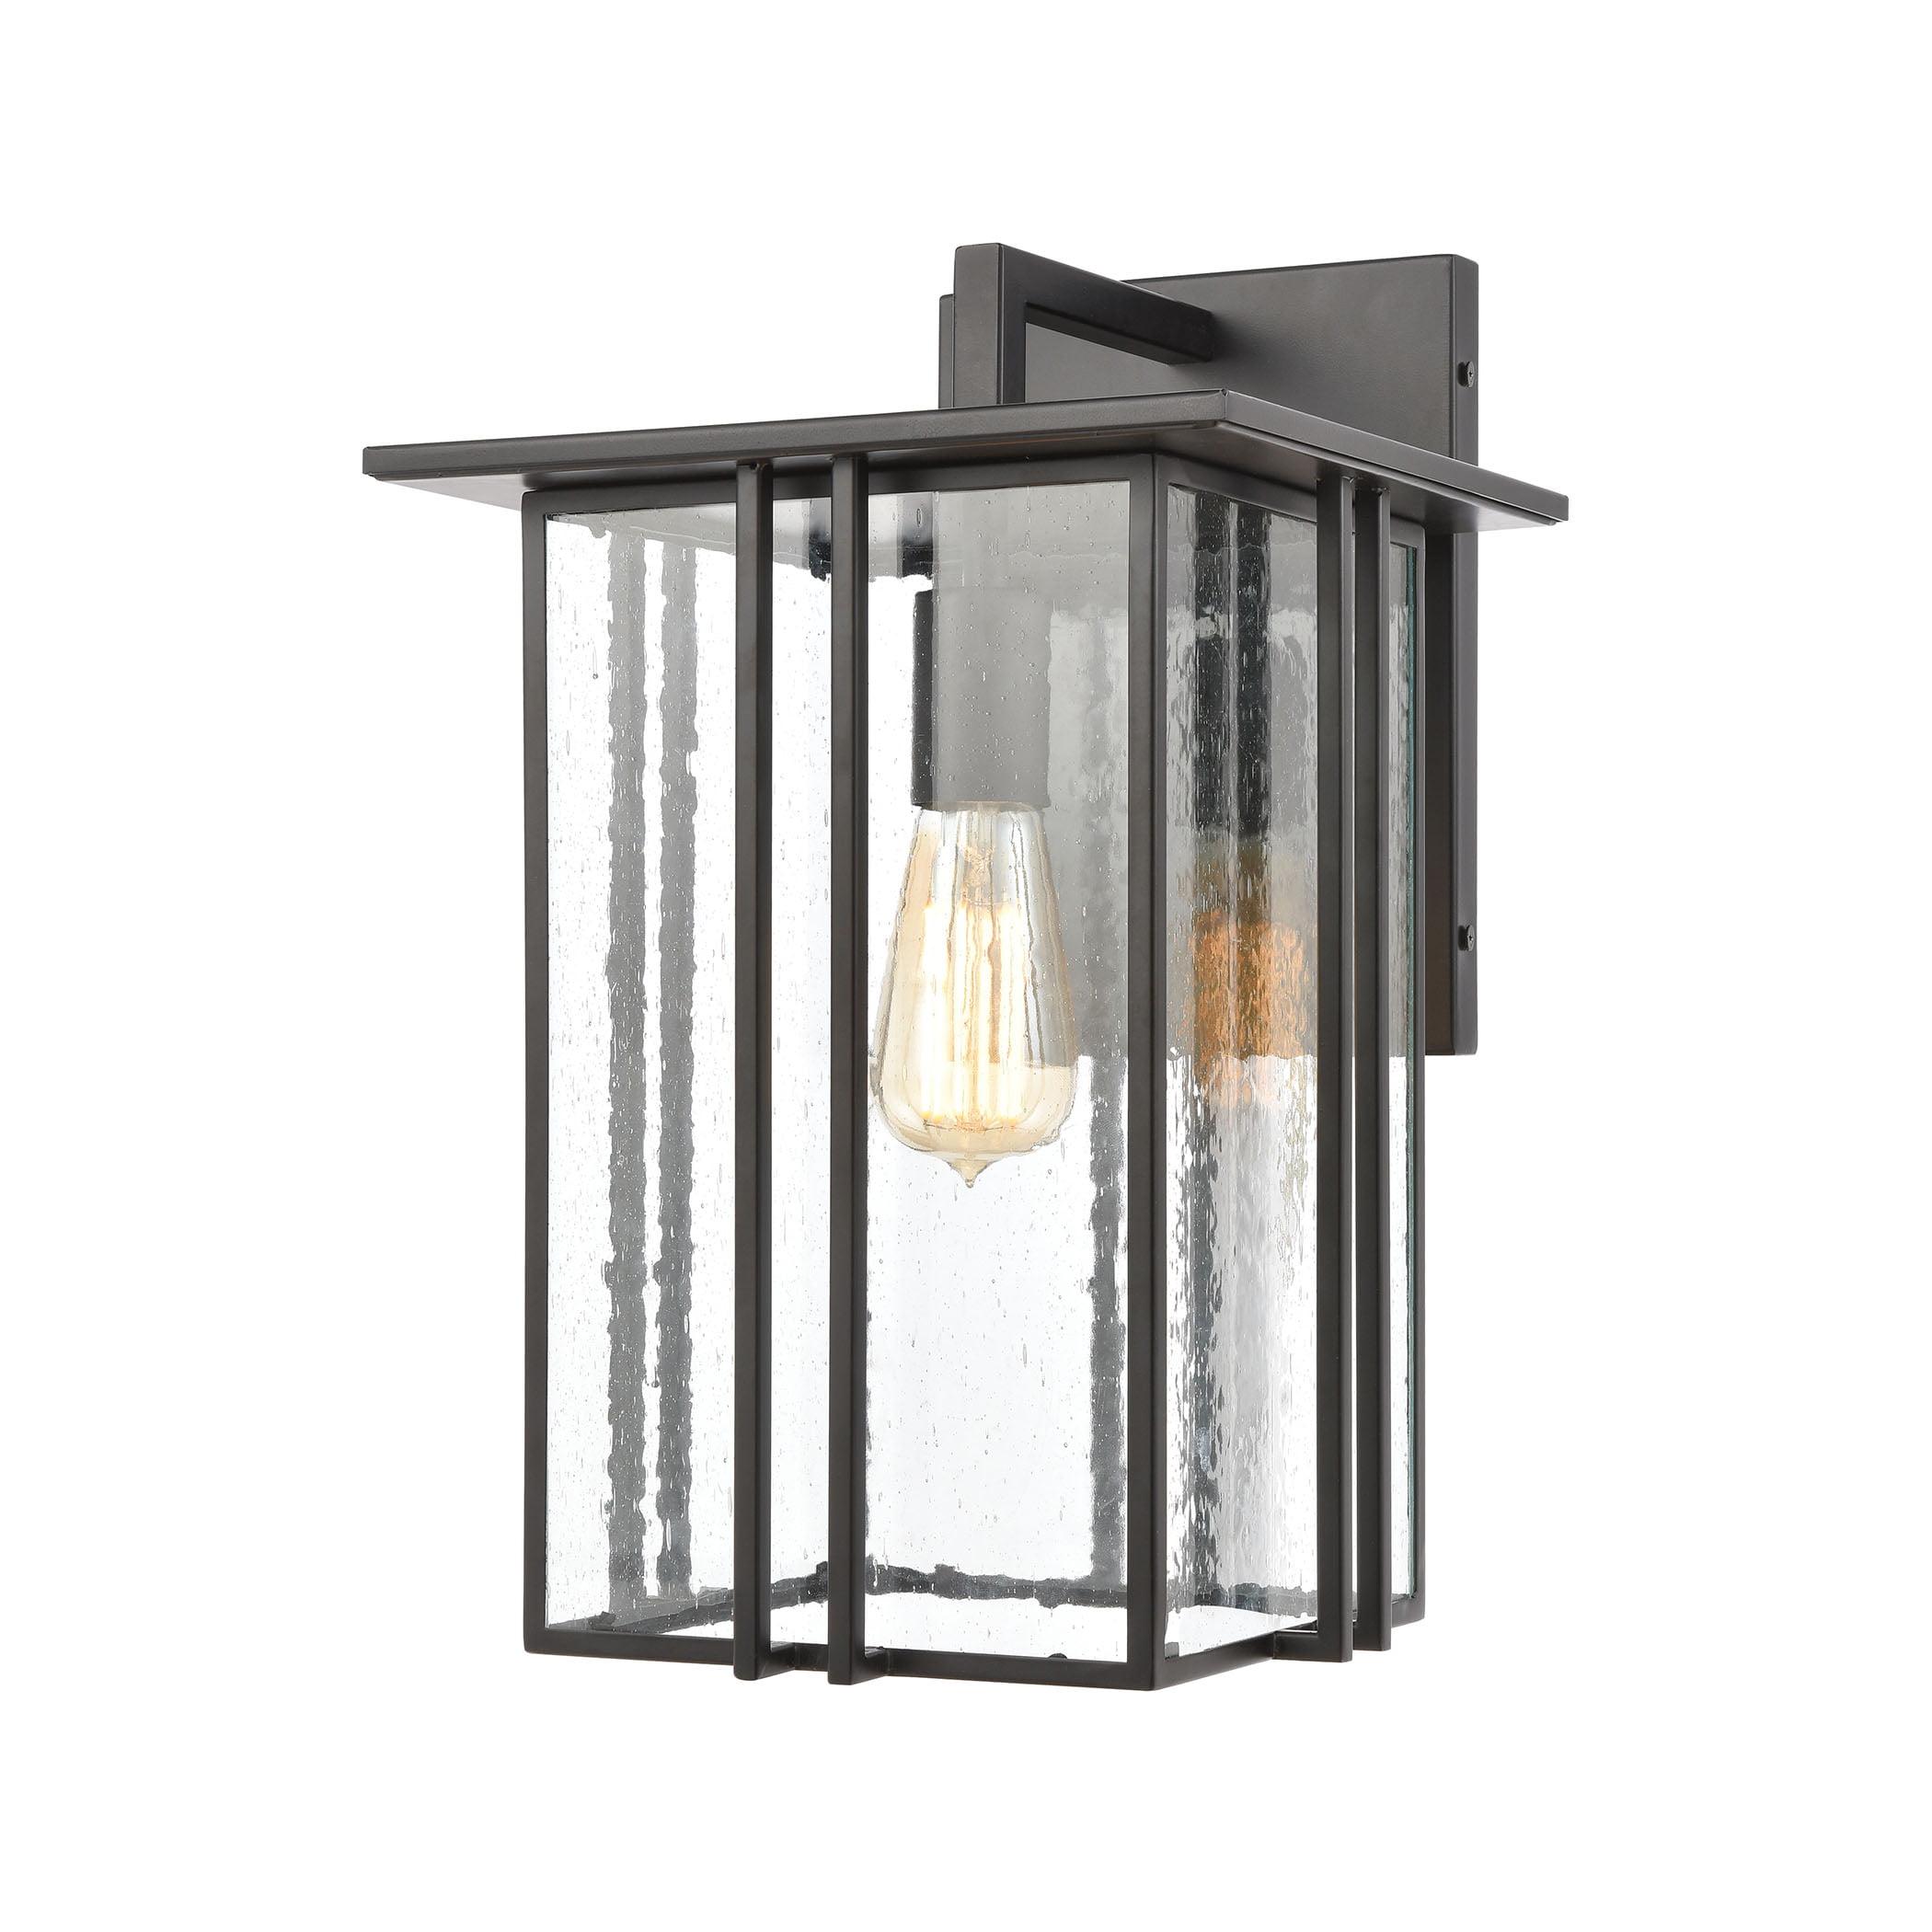 Radnor 16" Matte Black Seedy Glass Dimmable Outdoor Wall Sconce